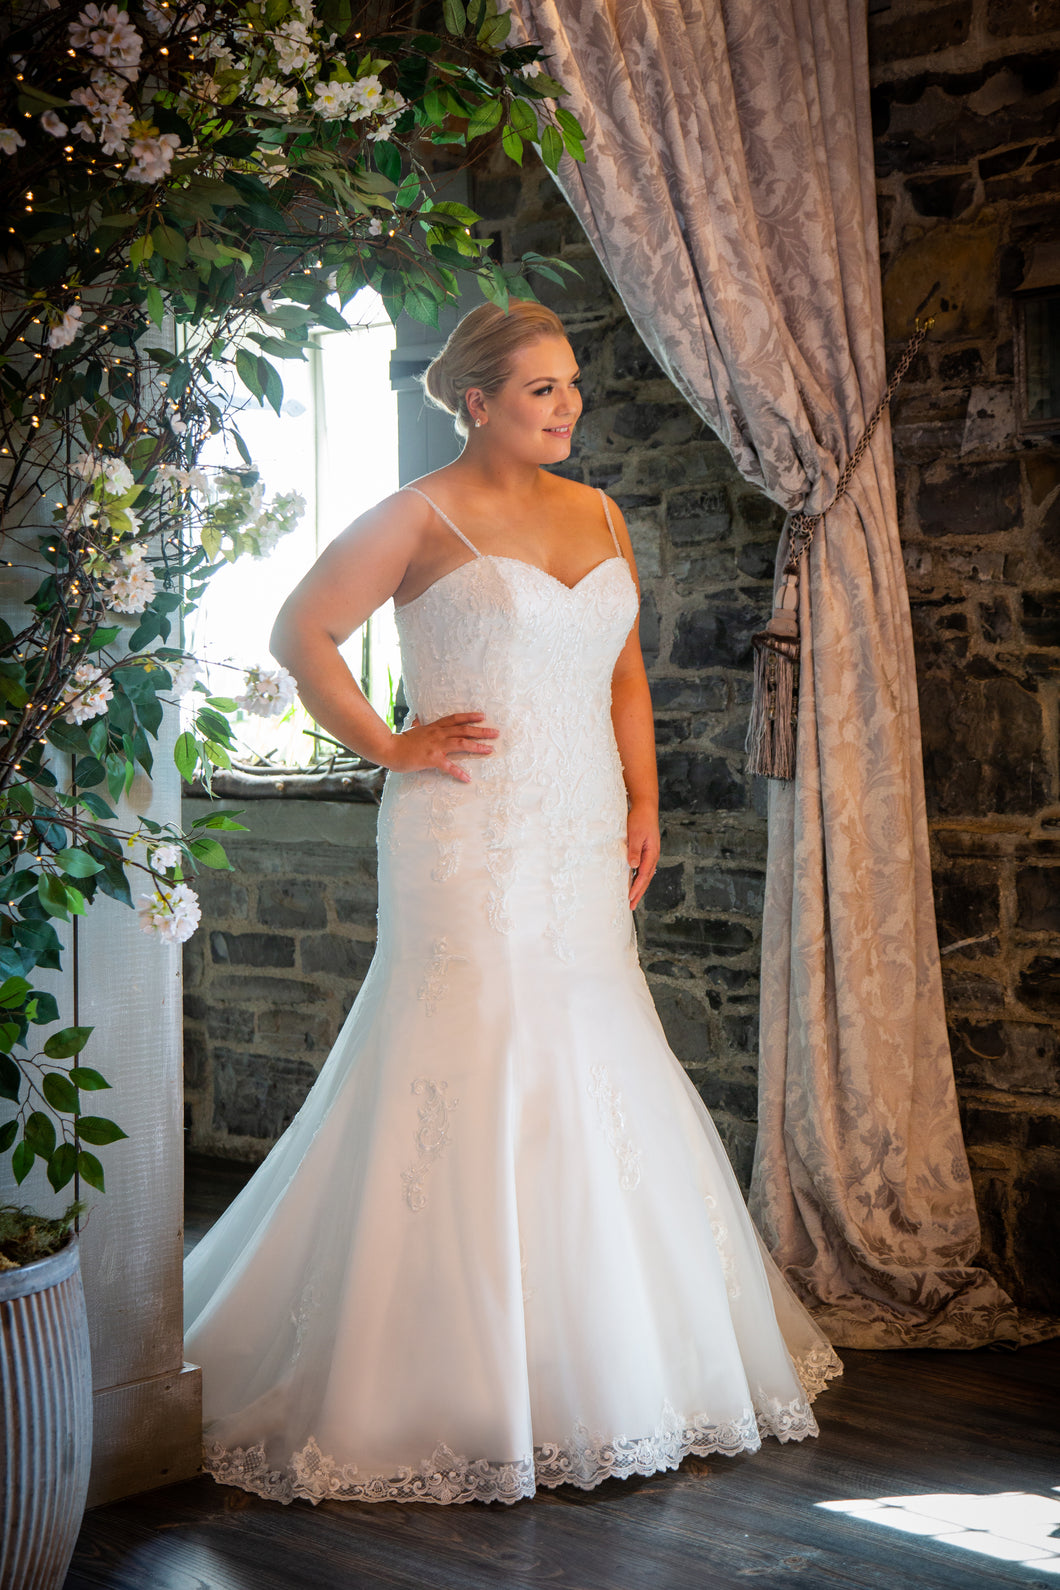 Crystal -  Bridal Gown from the Beautiful Brides plus collection - Size 18